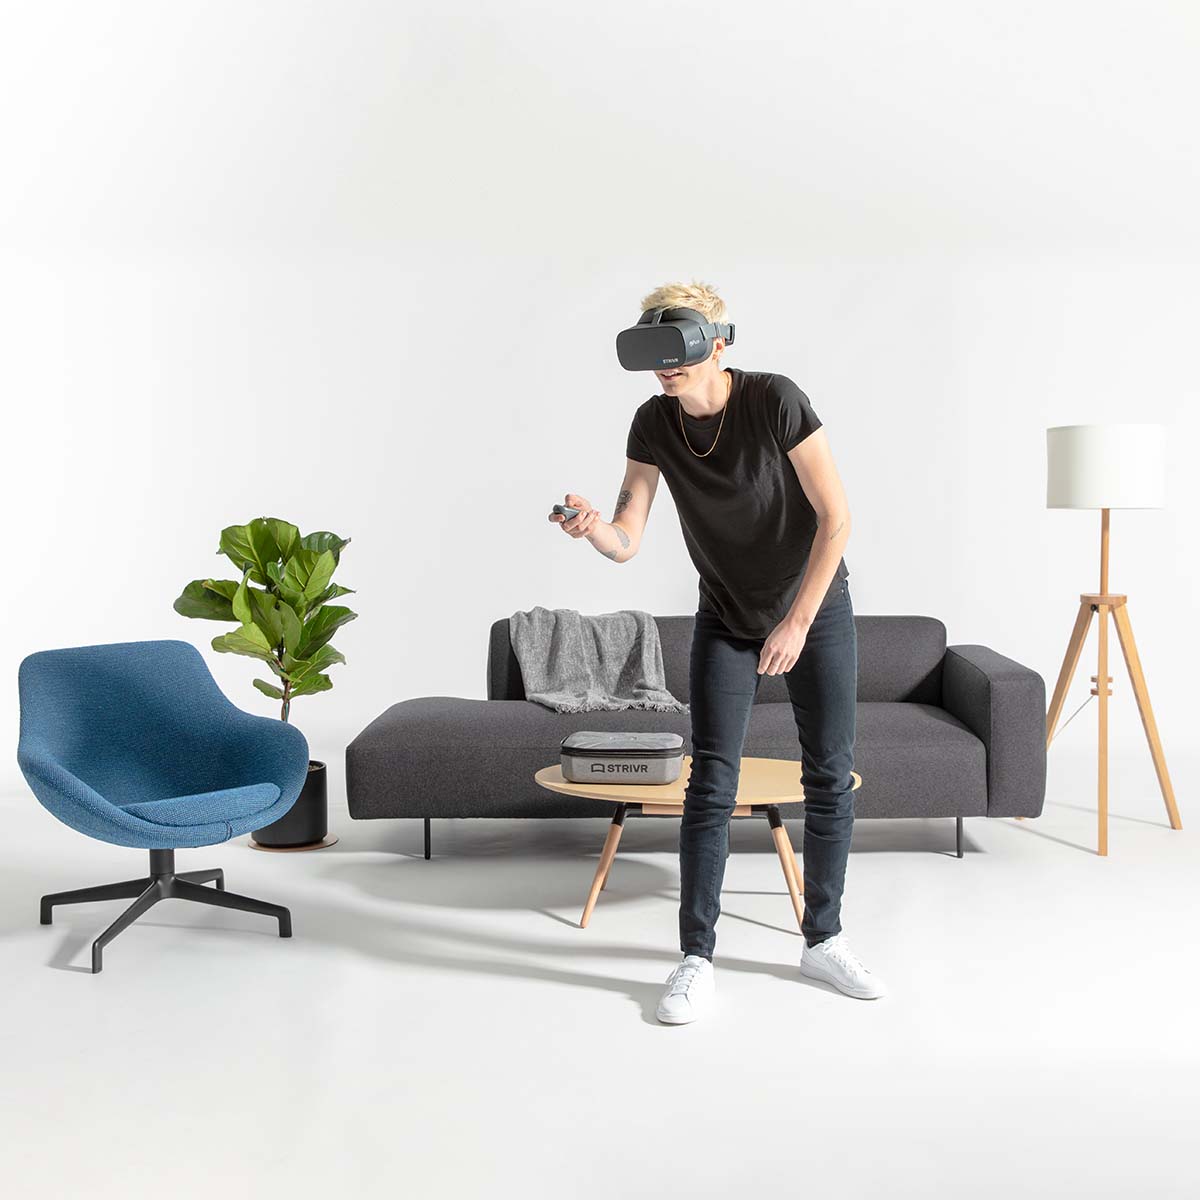 person using vr headset in living room